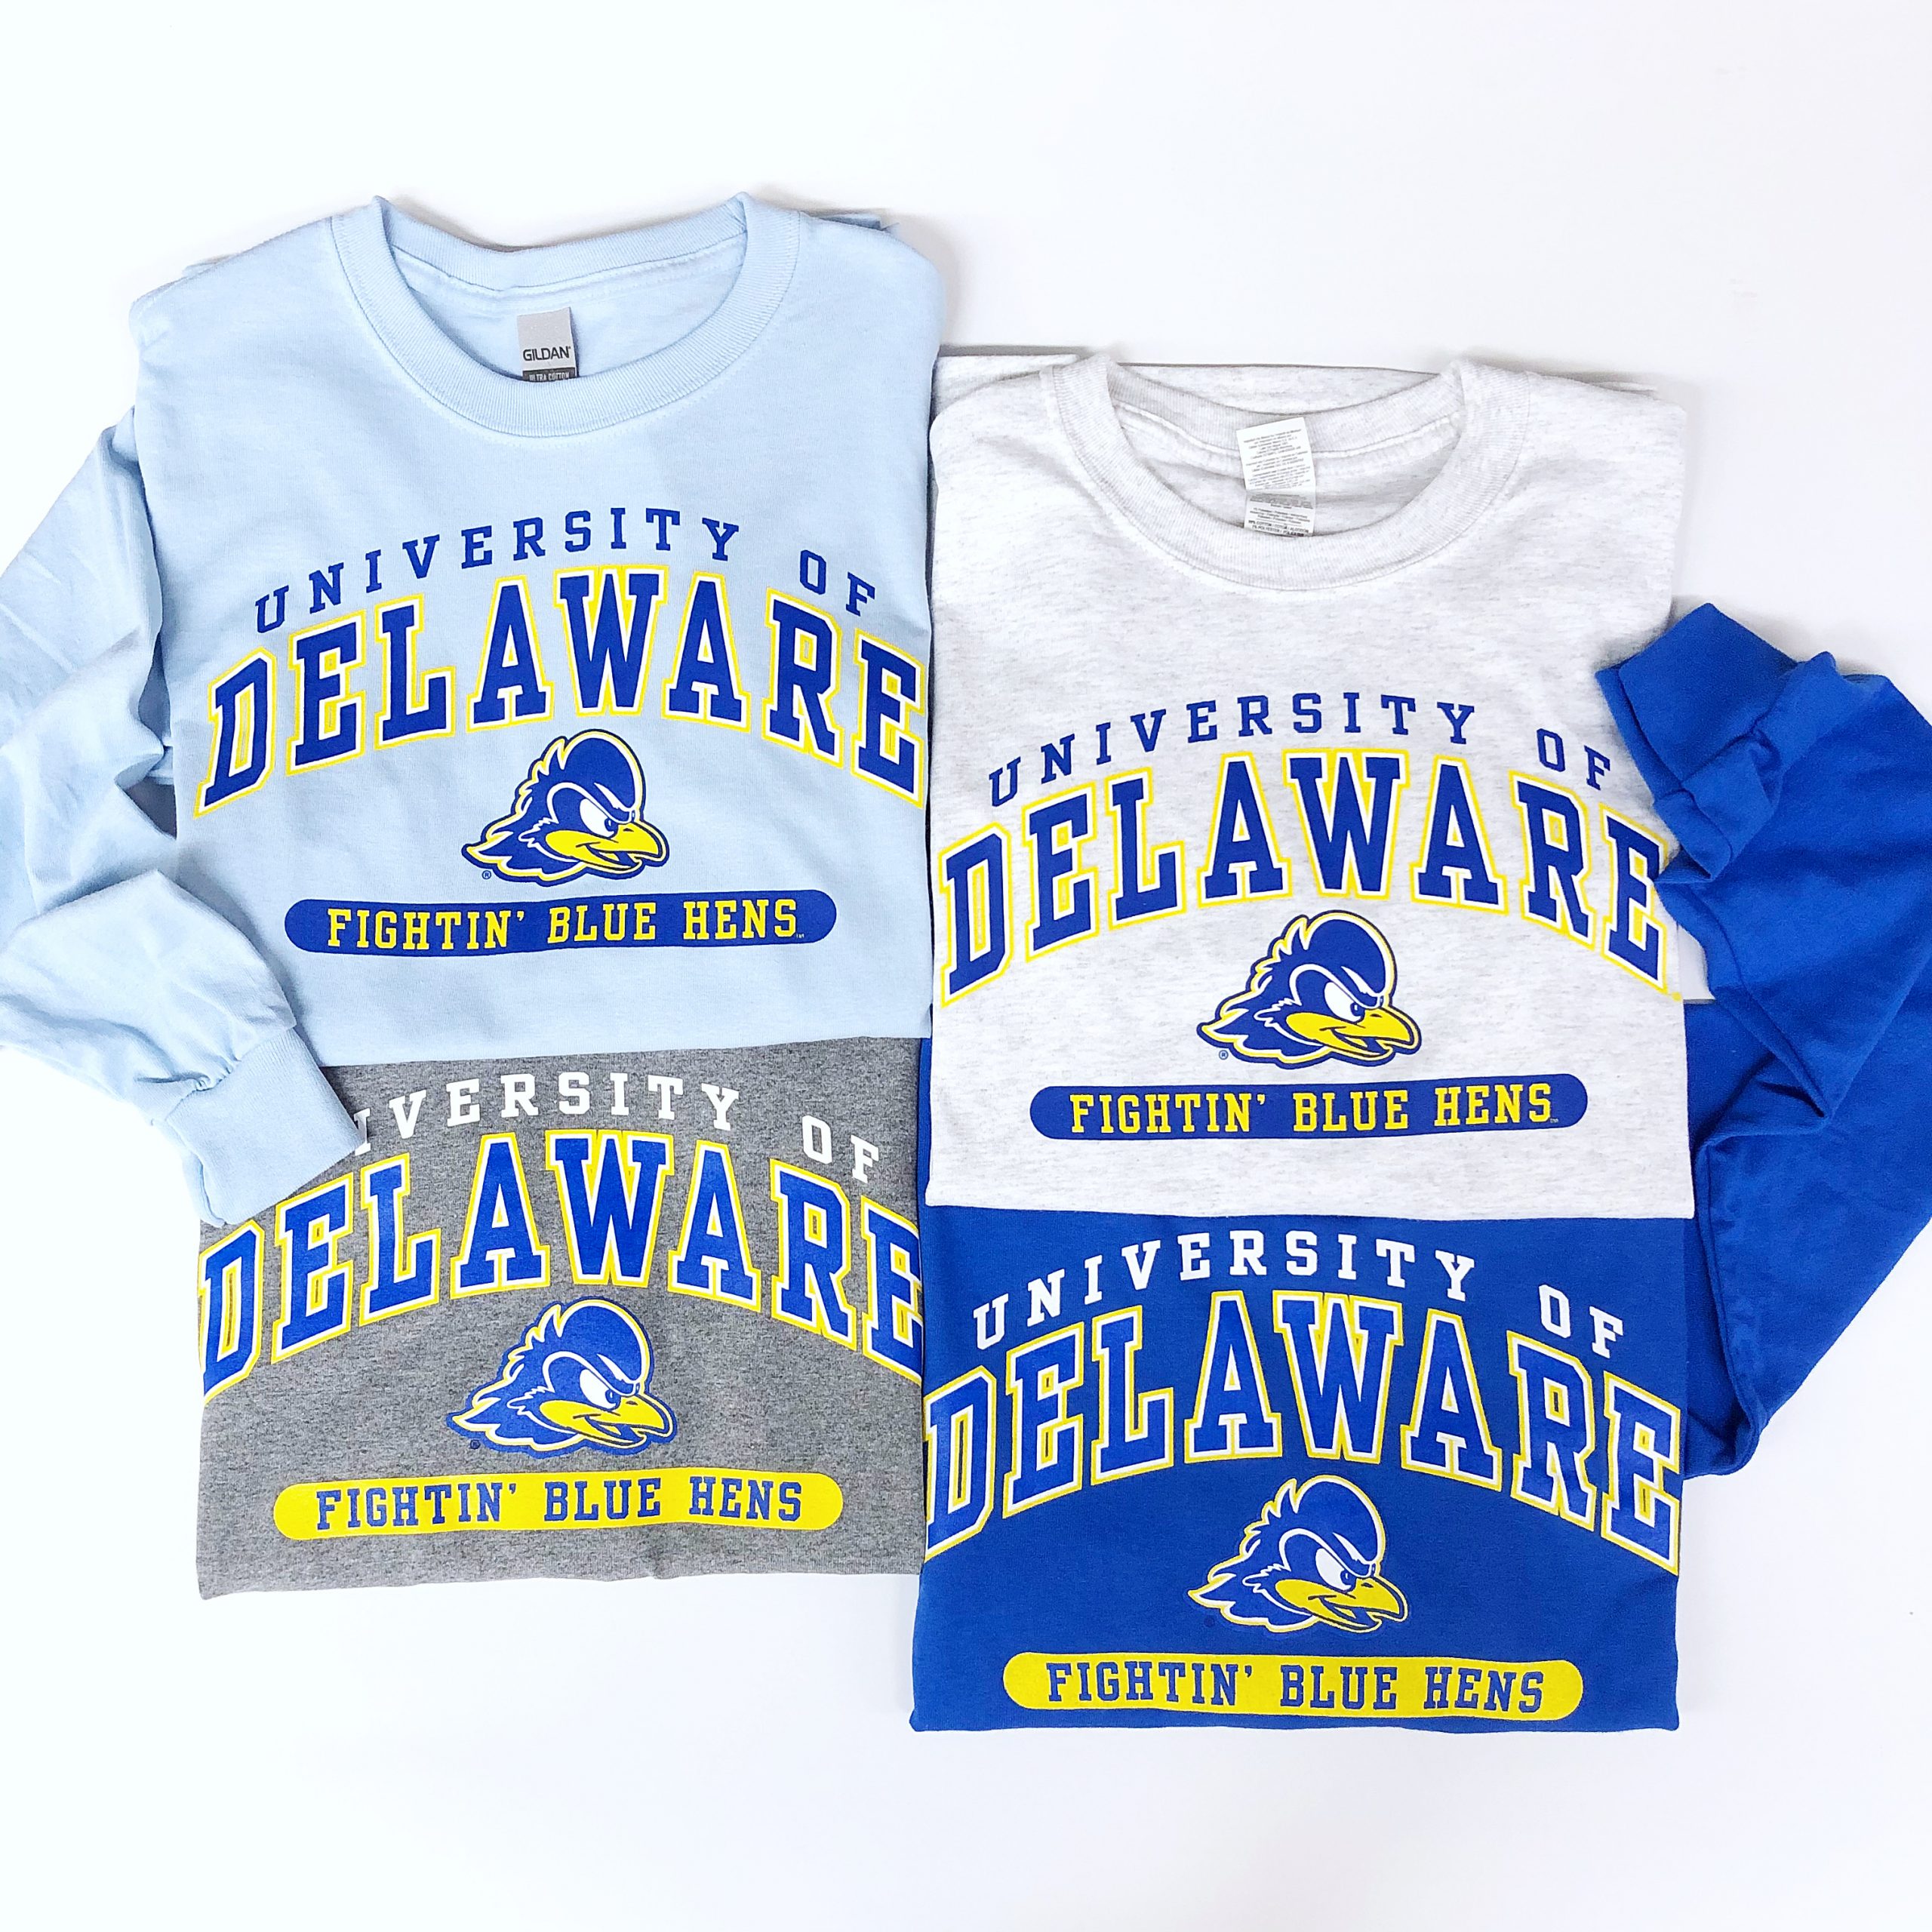 University of Delaware 3-Color Bird T-shirt – National 5 and 10